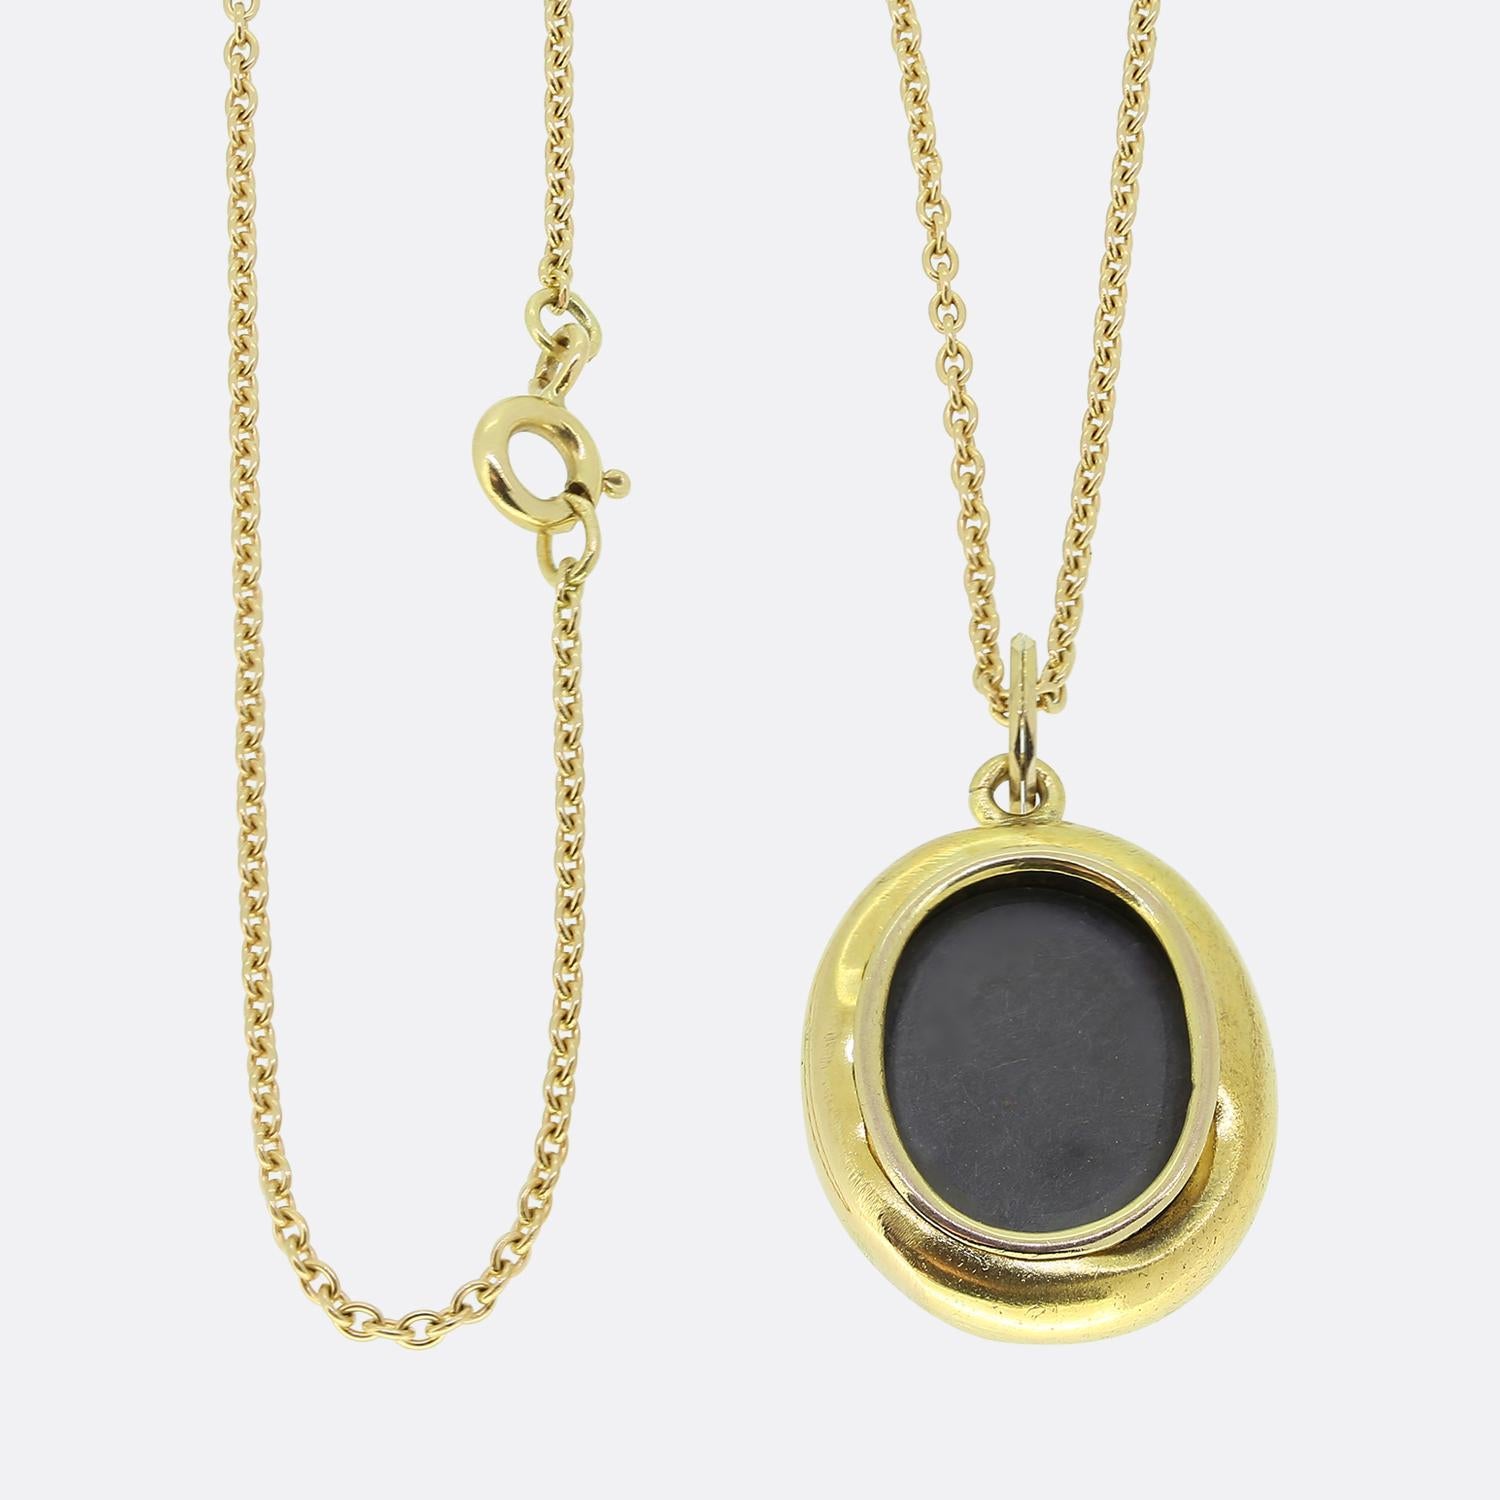 Here we have a wonderful garnet set locket necklace. This antique pendant has been crafted from 15ct yellow gold into an oval shape and set with three oval shaped almandine garnets. These focal gemstones sit slightly risen atop an ornately engraved